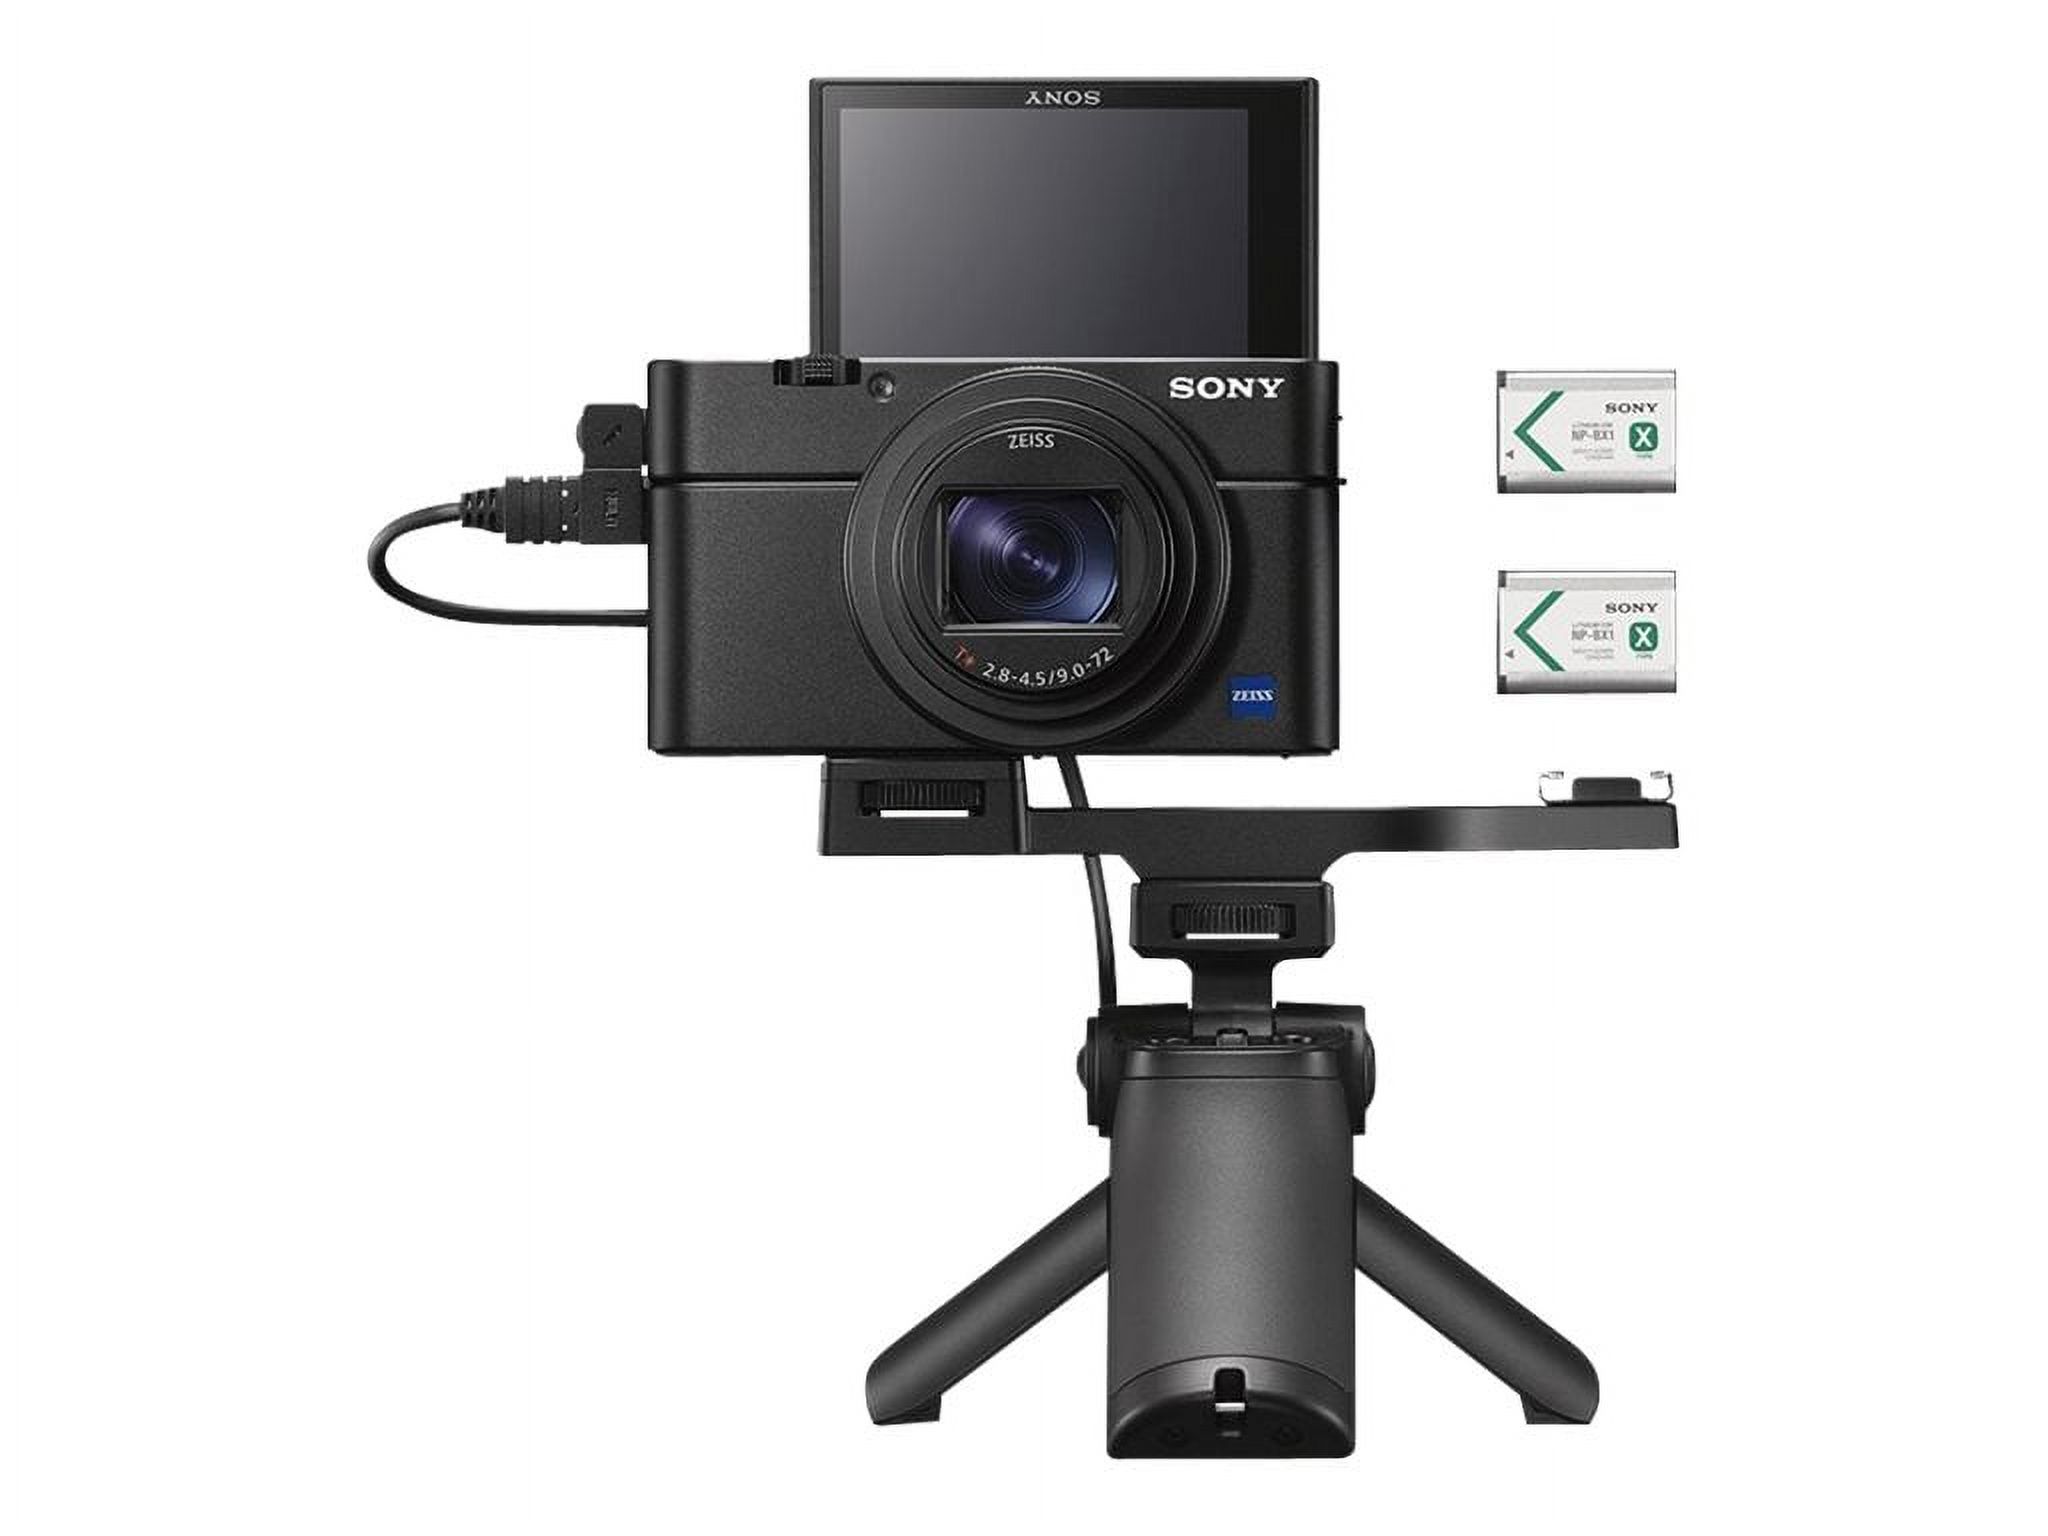 Sony Cyber-shot DSC-RX100 VII - Digital camera - compact - 20.1 MP - 4K / 30 fps - 8x optical zoom - ZEISS - Wi-Fi, NFC, Bluetooth - black - with Sony VCT-SGR1 Shooting Grip - image 5 of 15